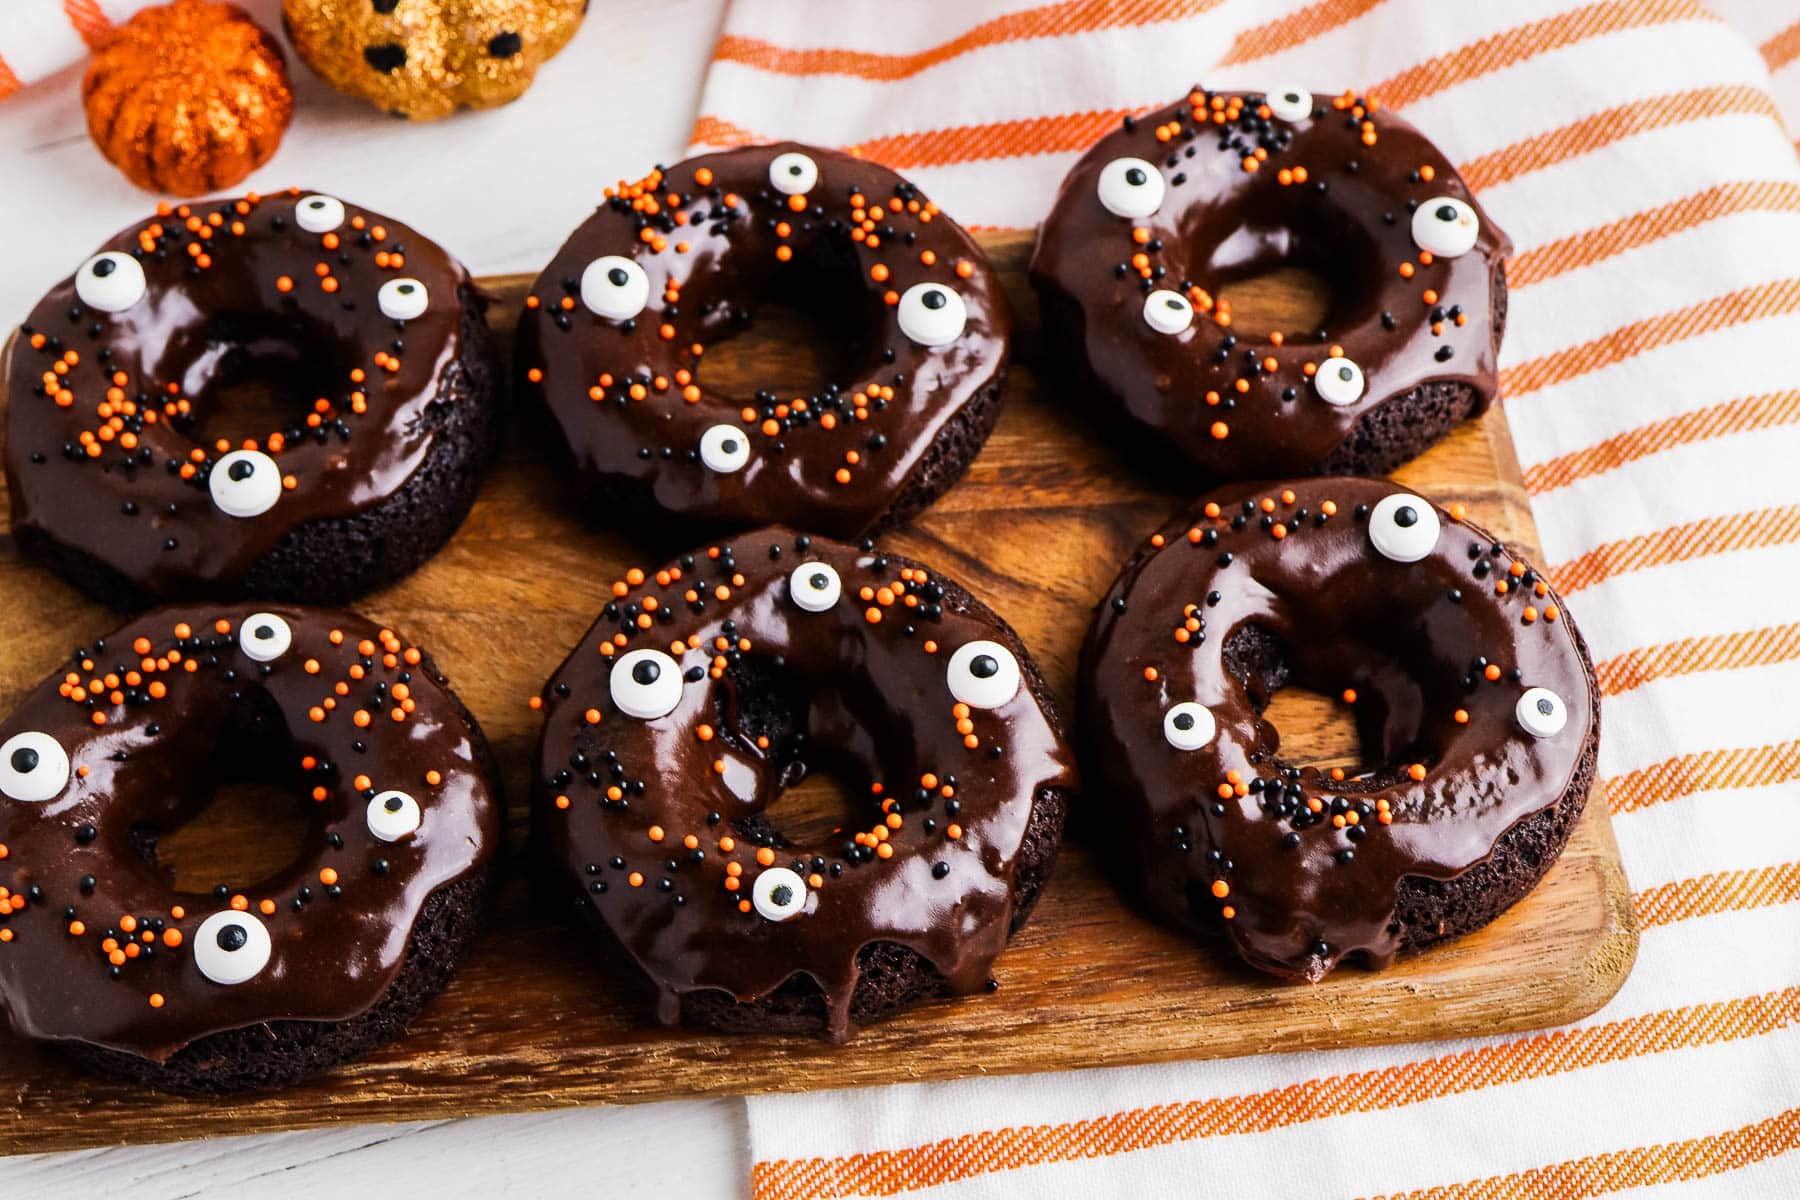 Chocolate Cake Mix Donuts decorated for halloween with frosting and sprinkles.